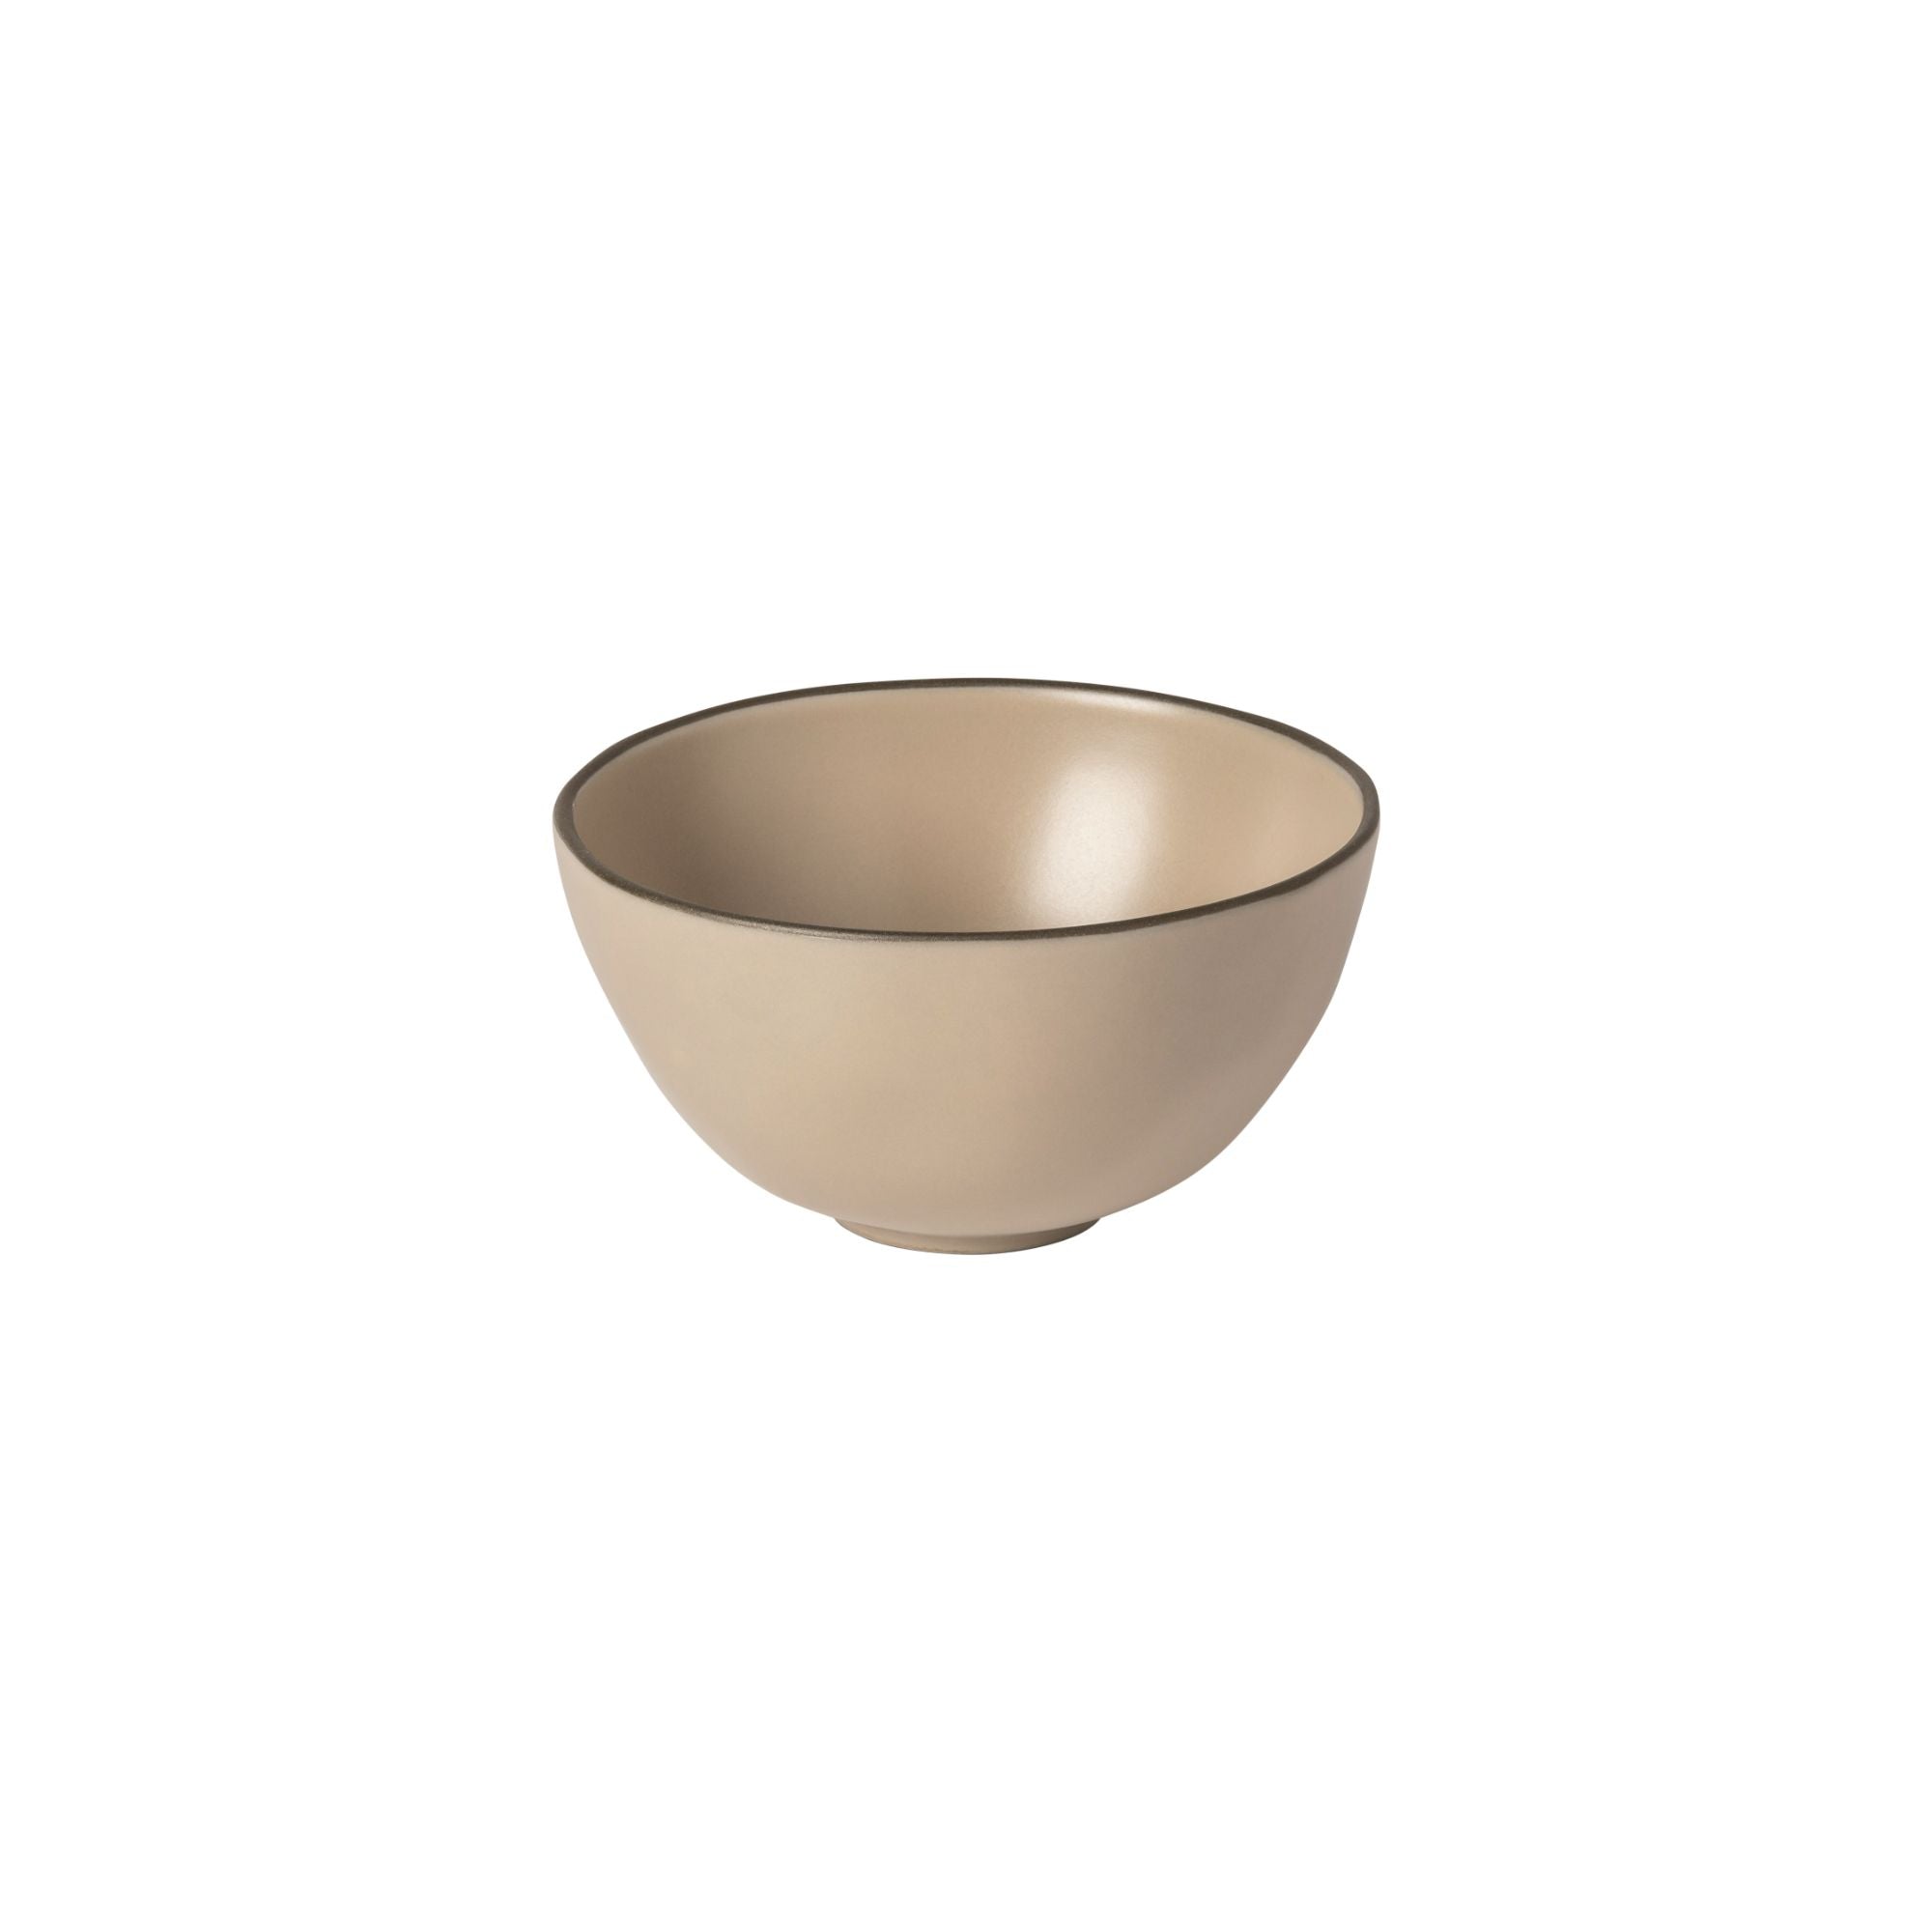 Stacked Organics Cereal Bowl